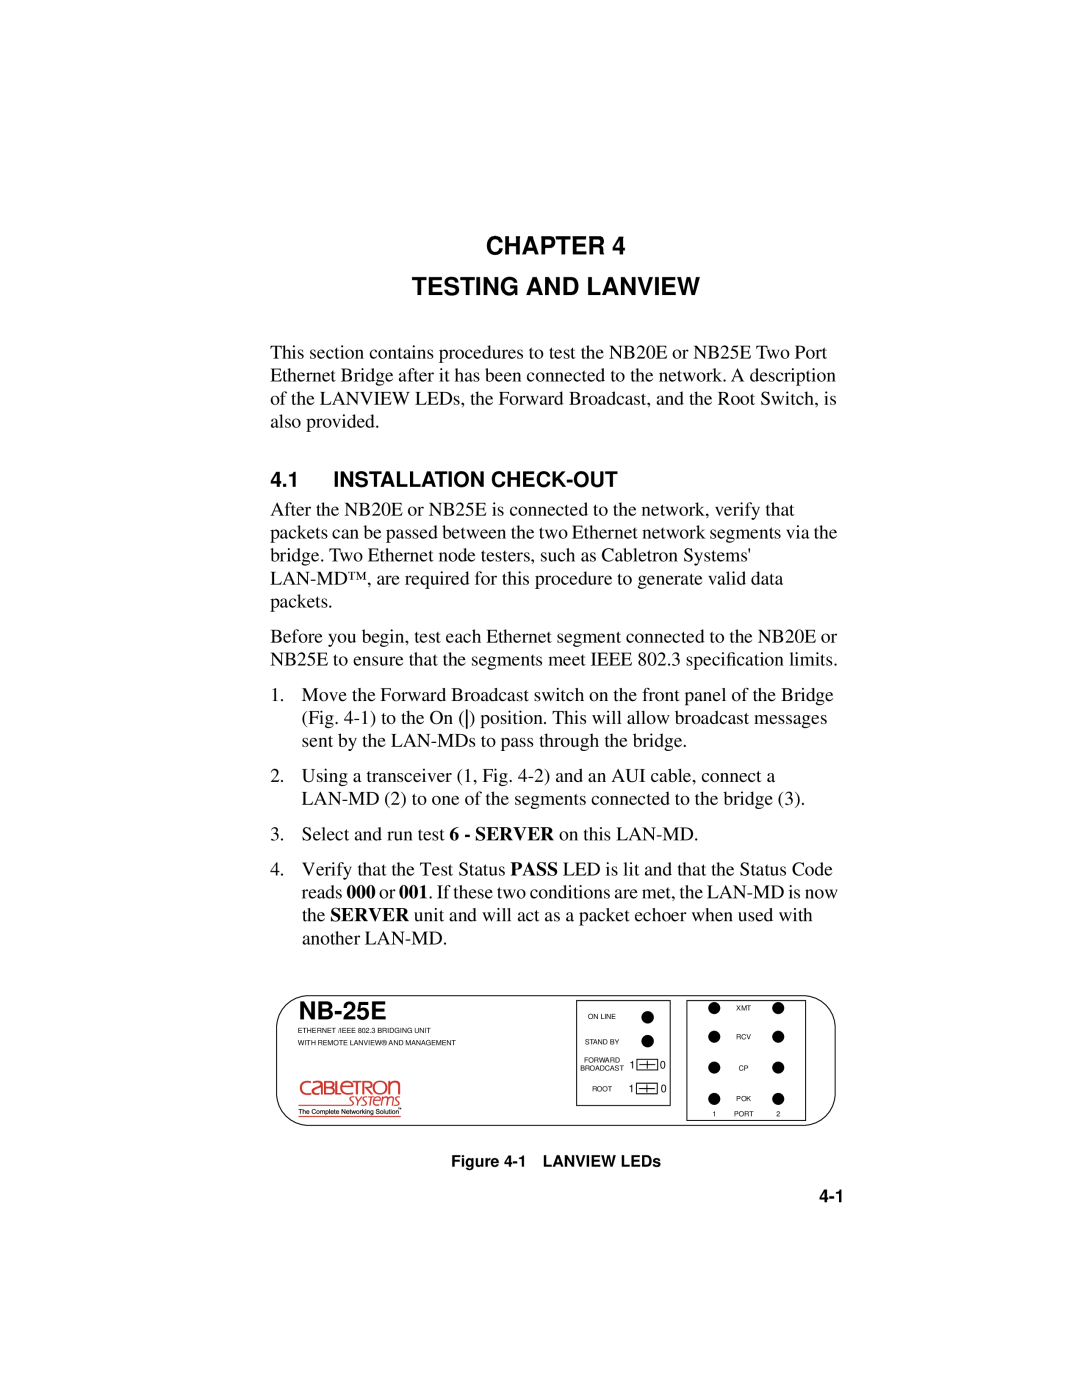 Cabletron Systems NB25 E, NB20E user manual Chapter Testing And Lanview, Installation Check-Out, NB-25E 